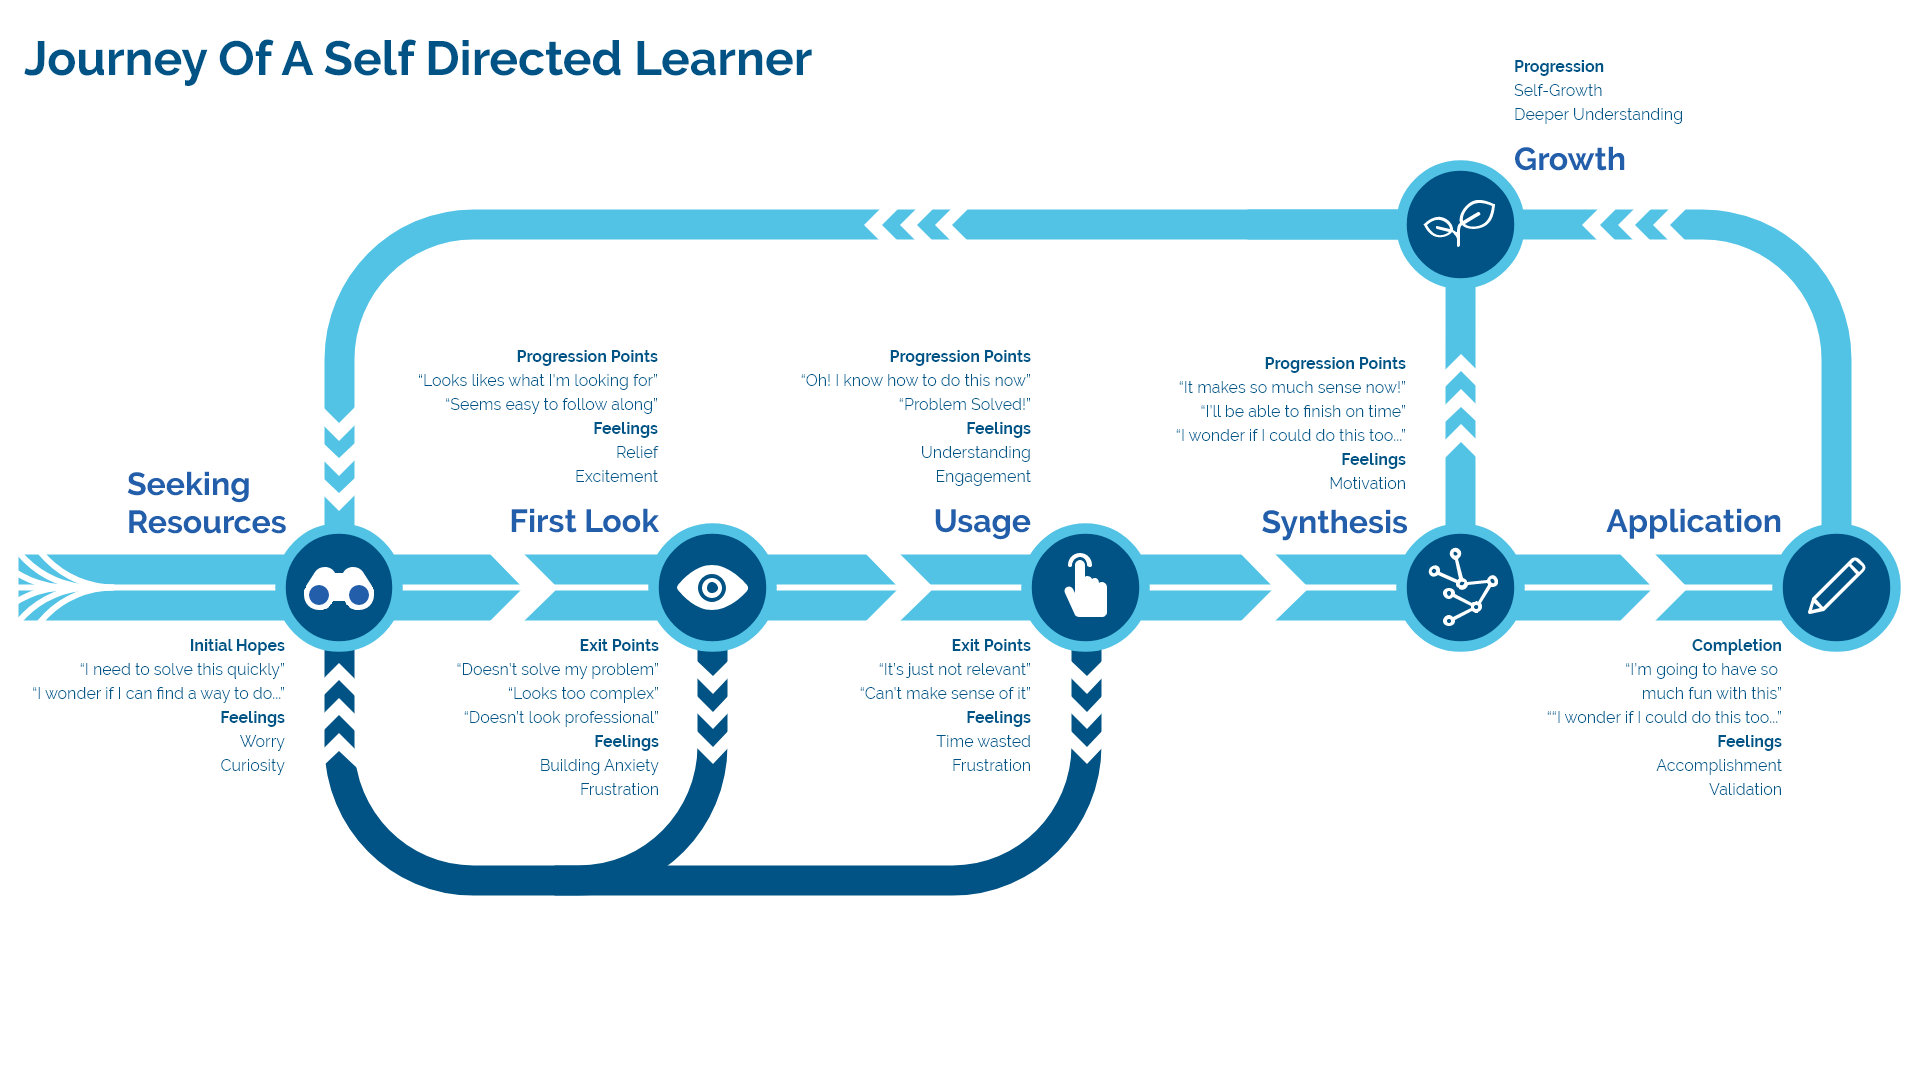 A User Journey Map of Self Directed Learners